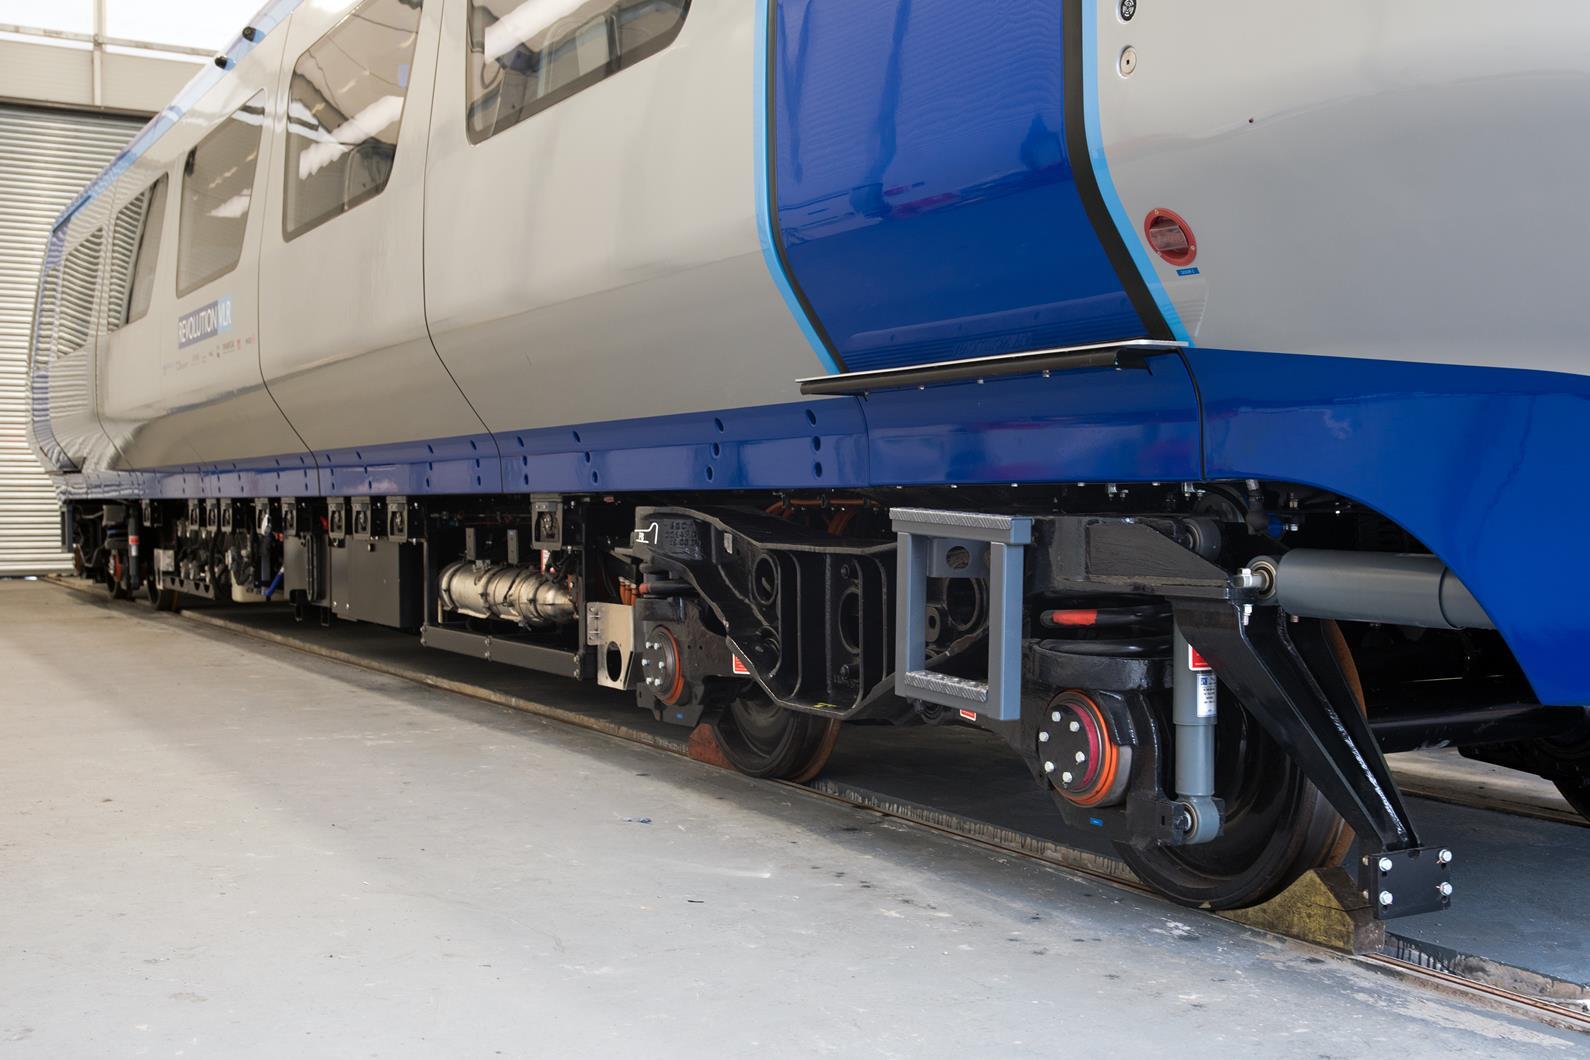 The RVLR bogies and traction equipment